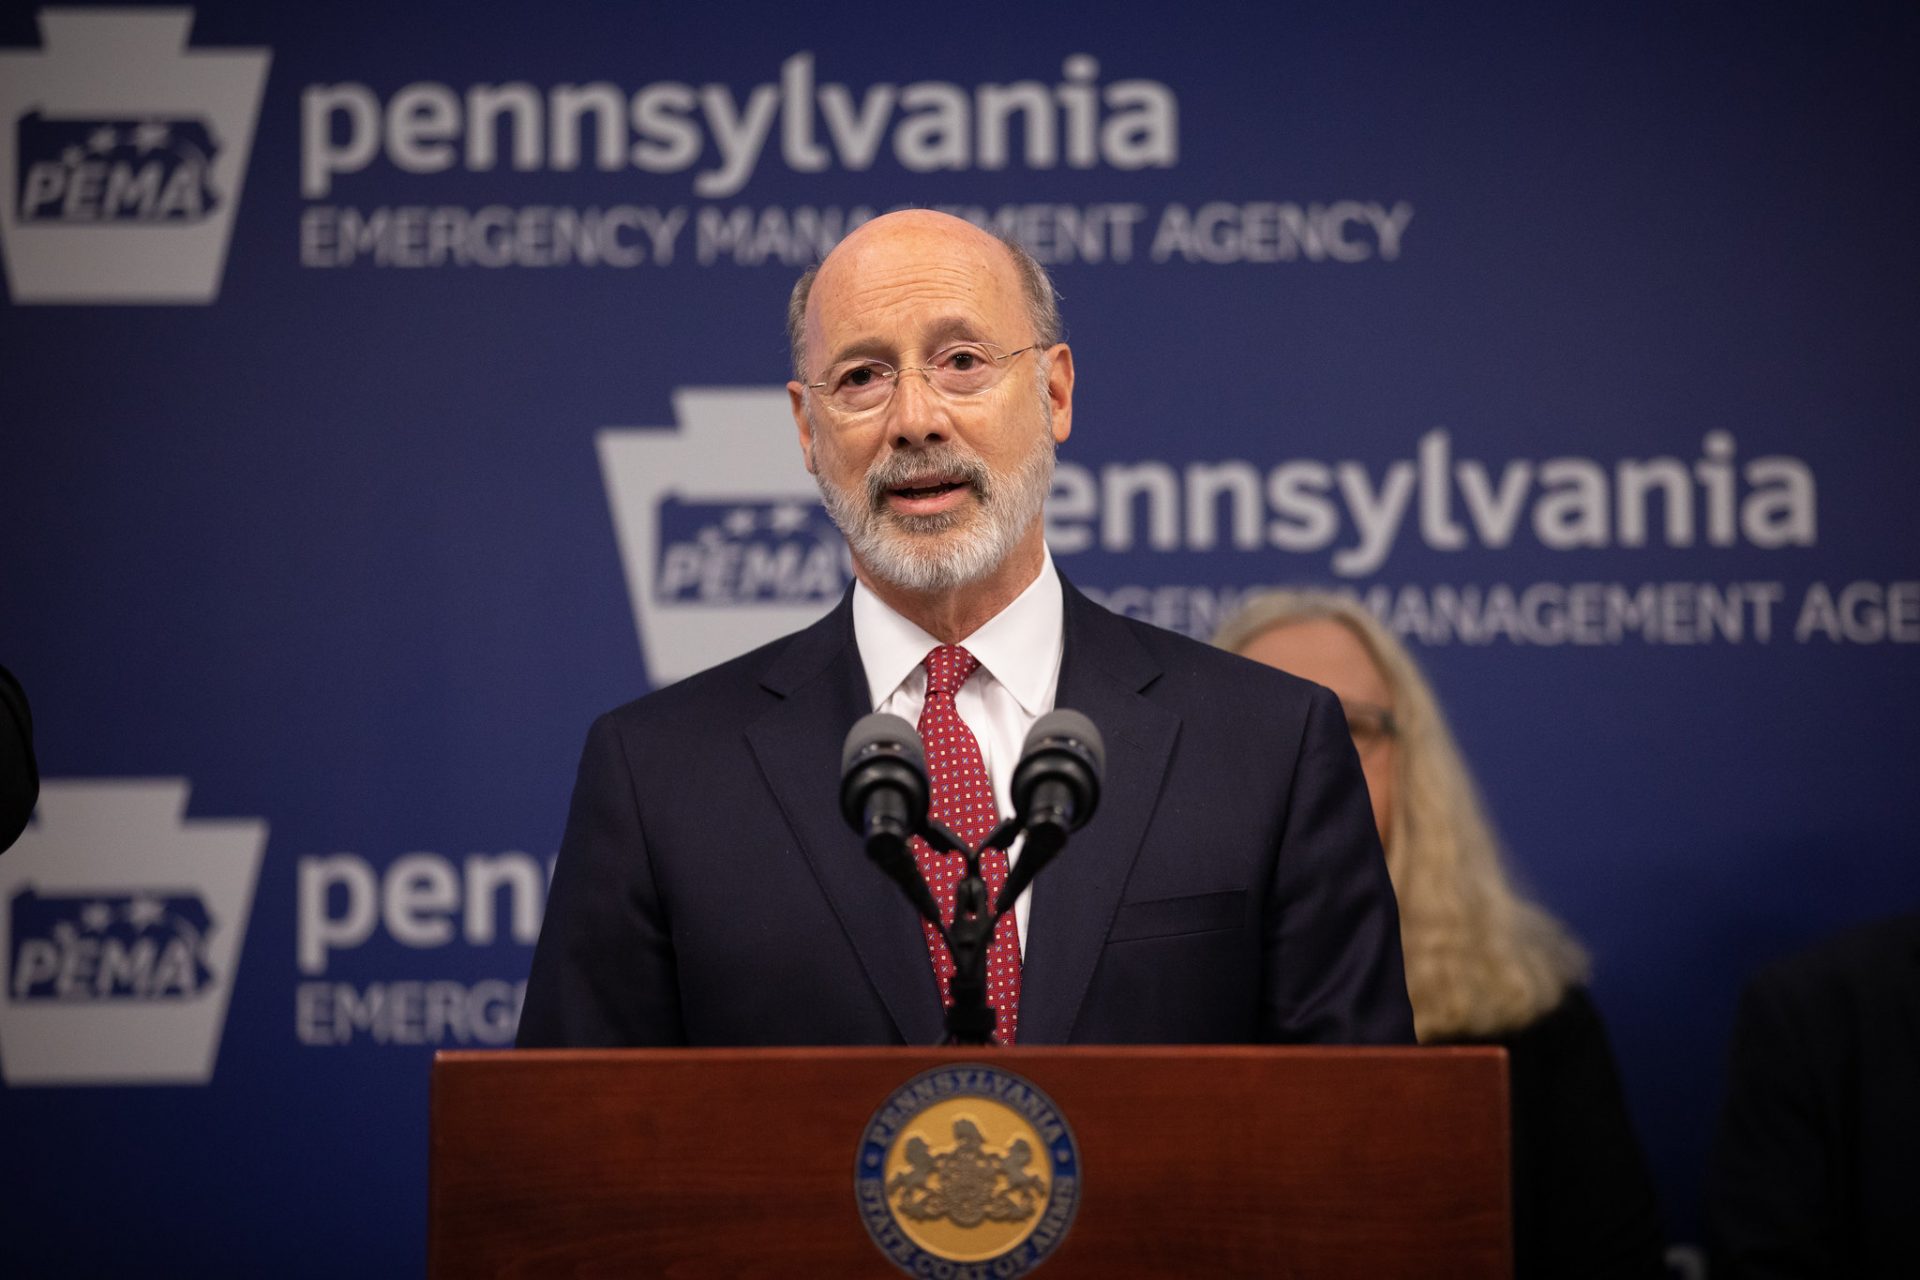 Governor Tom Wolf speaking to the press. Governor Tom Wolf and Secretary of Health Dr. Rachel Levine this afternoon provided an update on the state’s COVID-19 mitigation efforts, including one new presumptive positive case in Pike County, bringing the state’s total to 22, and guidance on how to reduce the spread of the virus.Harrisburg, PA March 12, 2020.